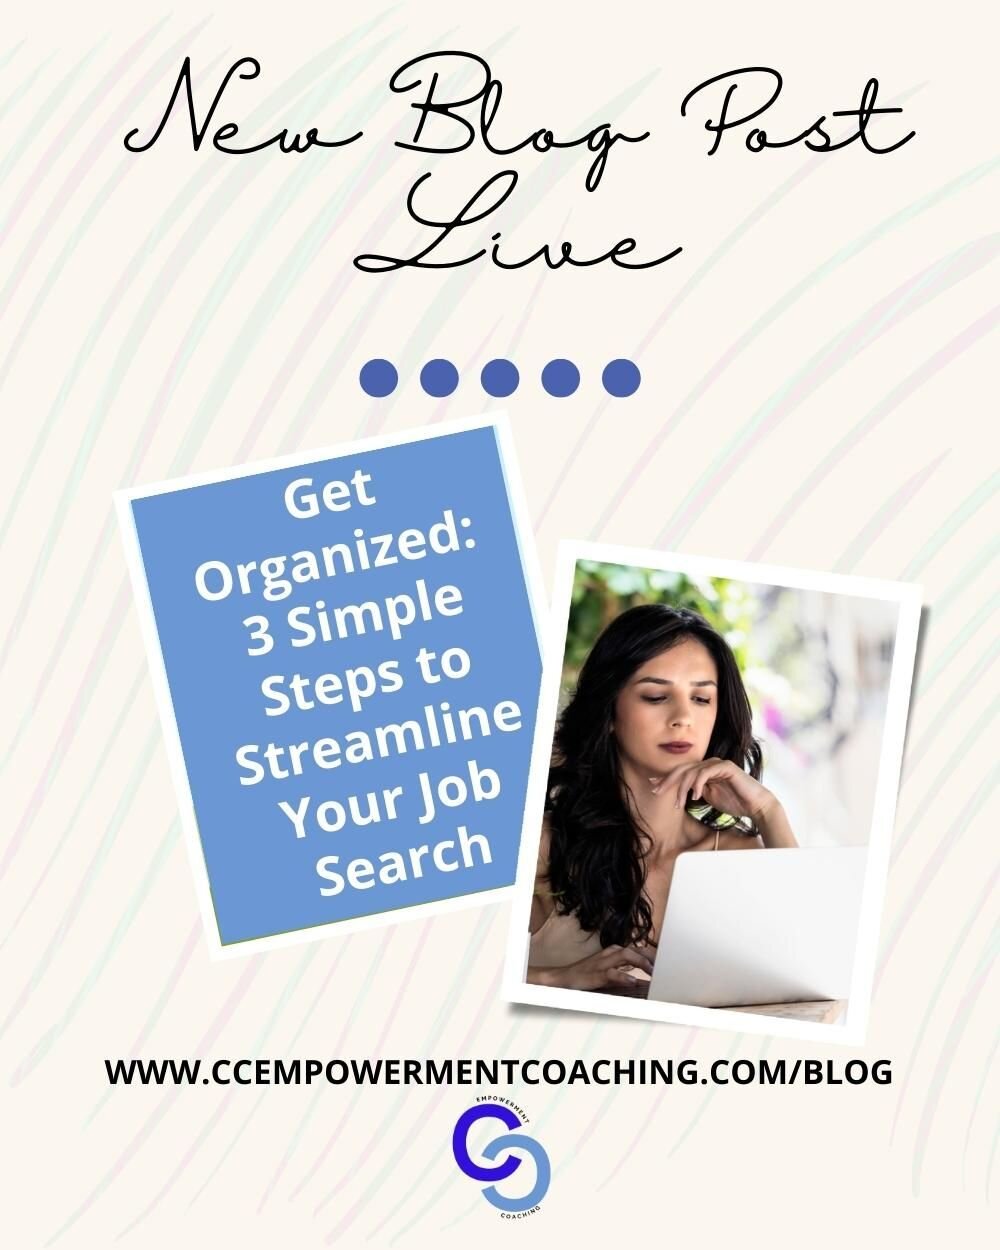 🔍✨ Staying organized is the key to a successful job search! Whether you're a first-time job seeker or a seasoned pro, implementing simple organizational systems can save you time and headaches. Check out our latest blog post for easy tips to stay or